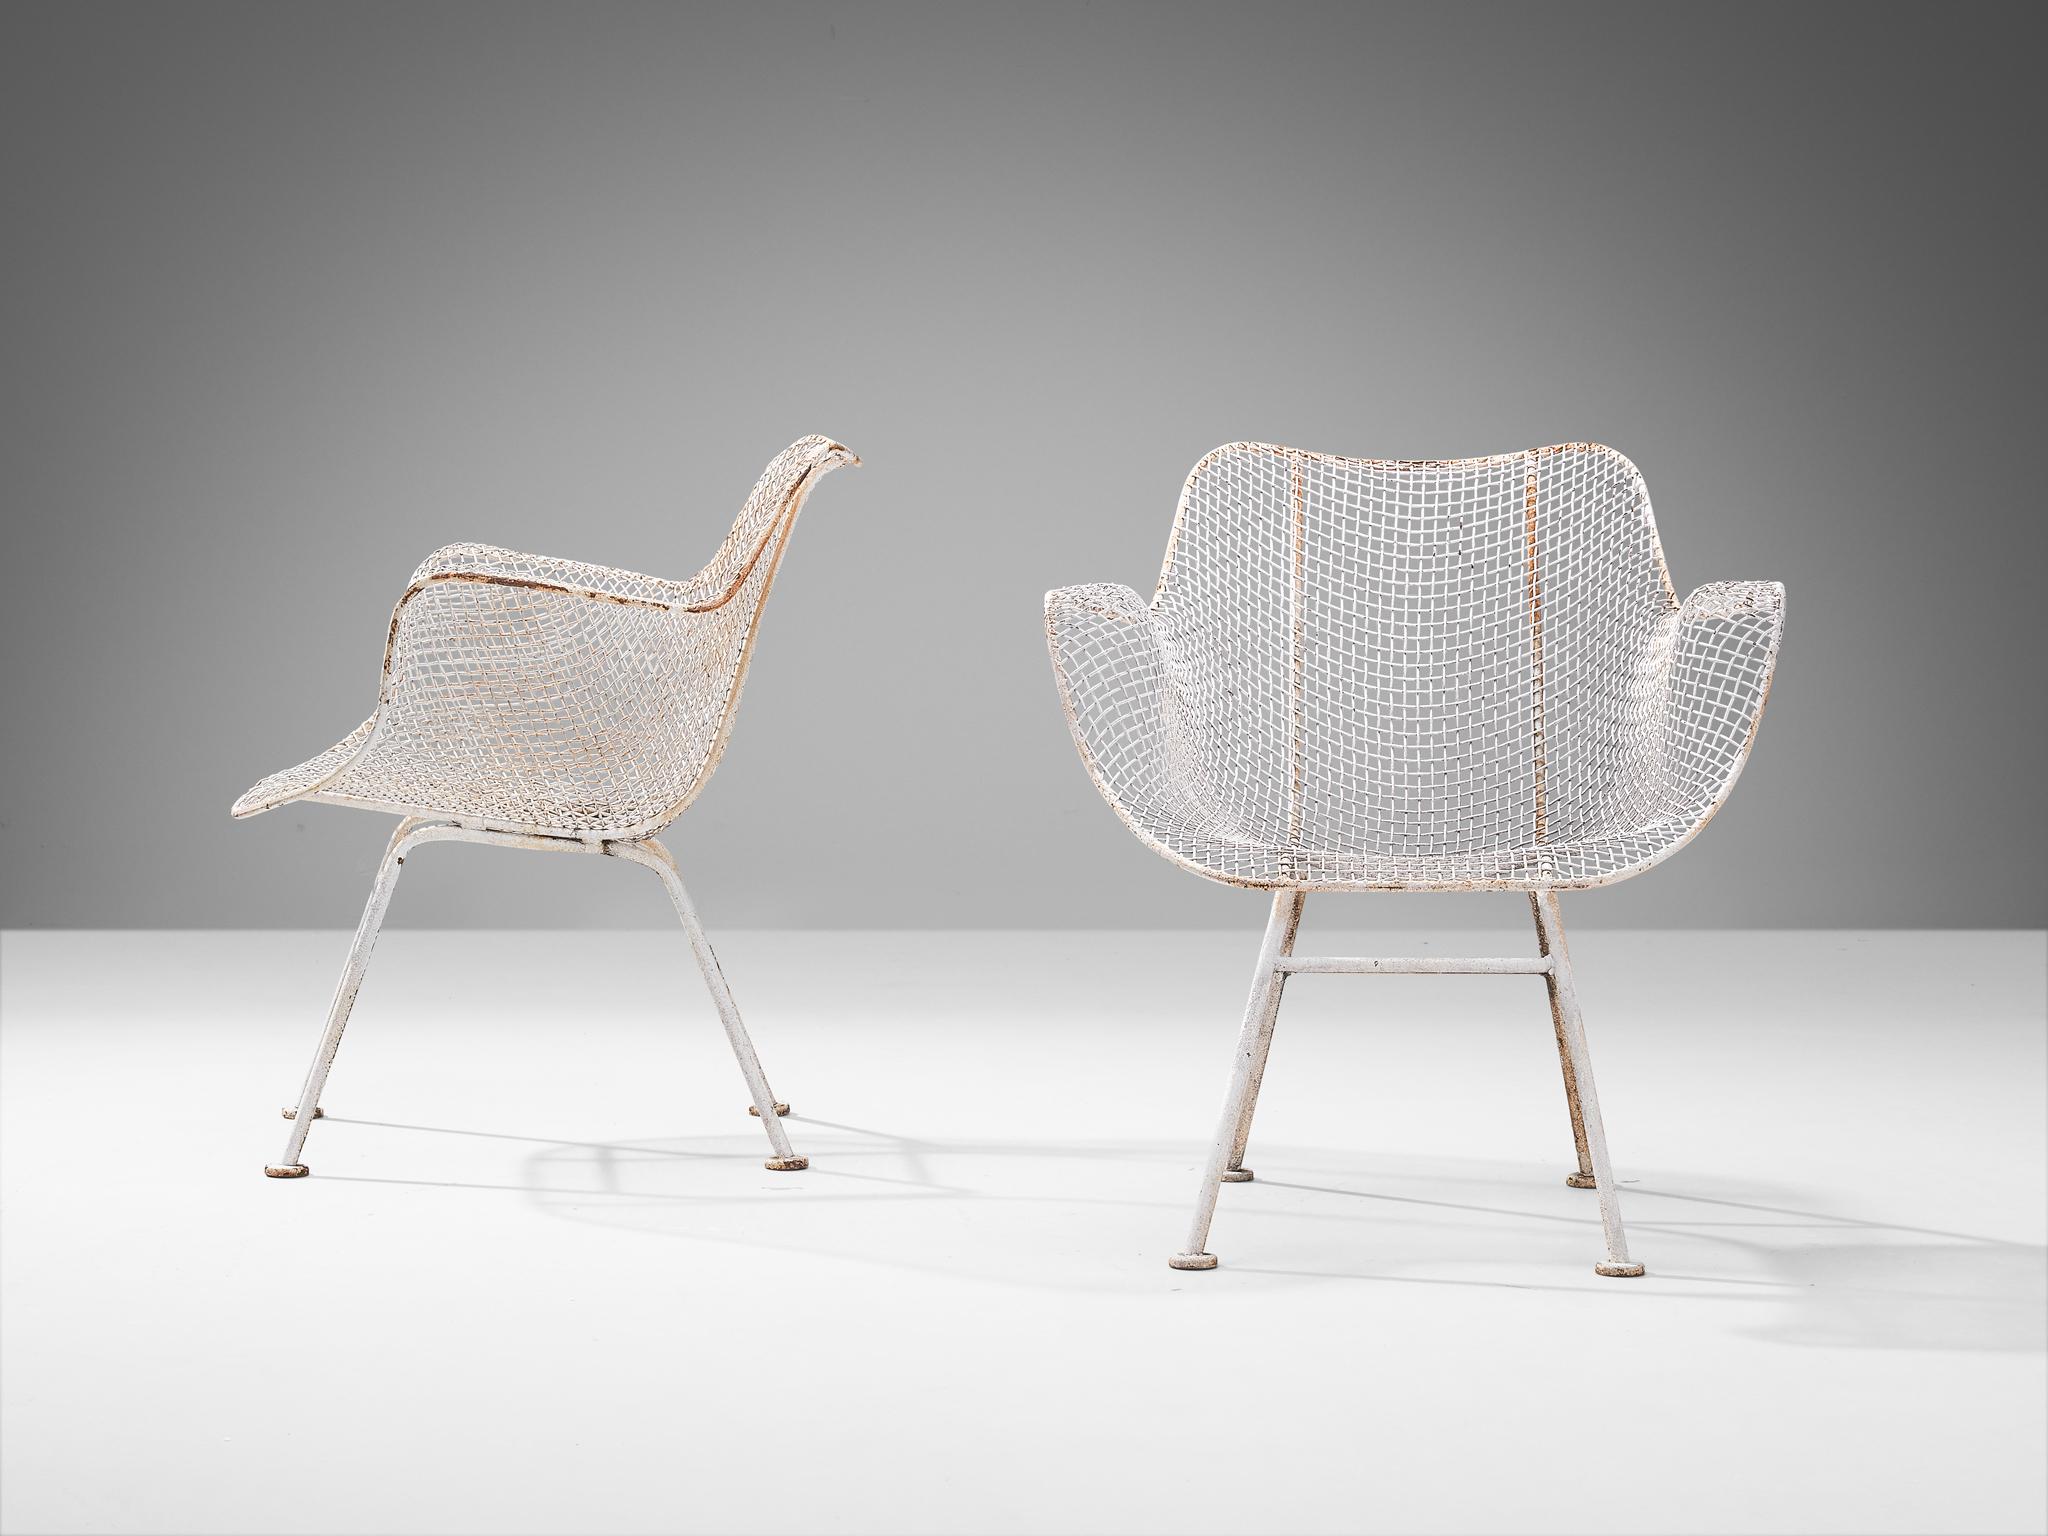 Russell Woodard, pair of 'Sculptura' patio chairs, wrought iron, white lacquer, United States, 1950s.

These 'Sculptura' patio chairs are designed by Russell Woodard. Executed in iron and woven steel, these chairs feature an intricate interlacing of